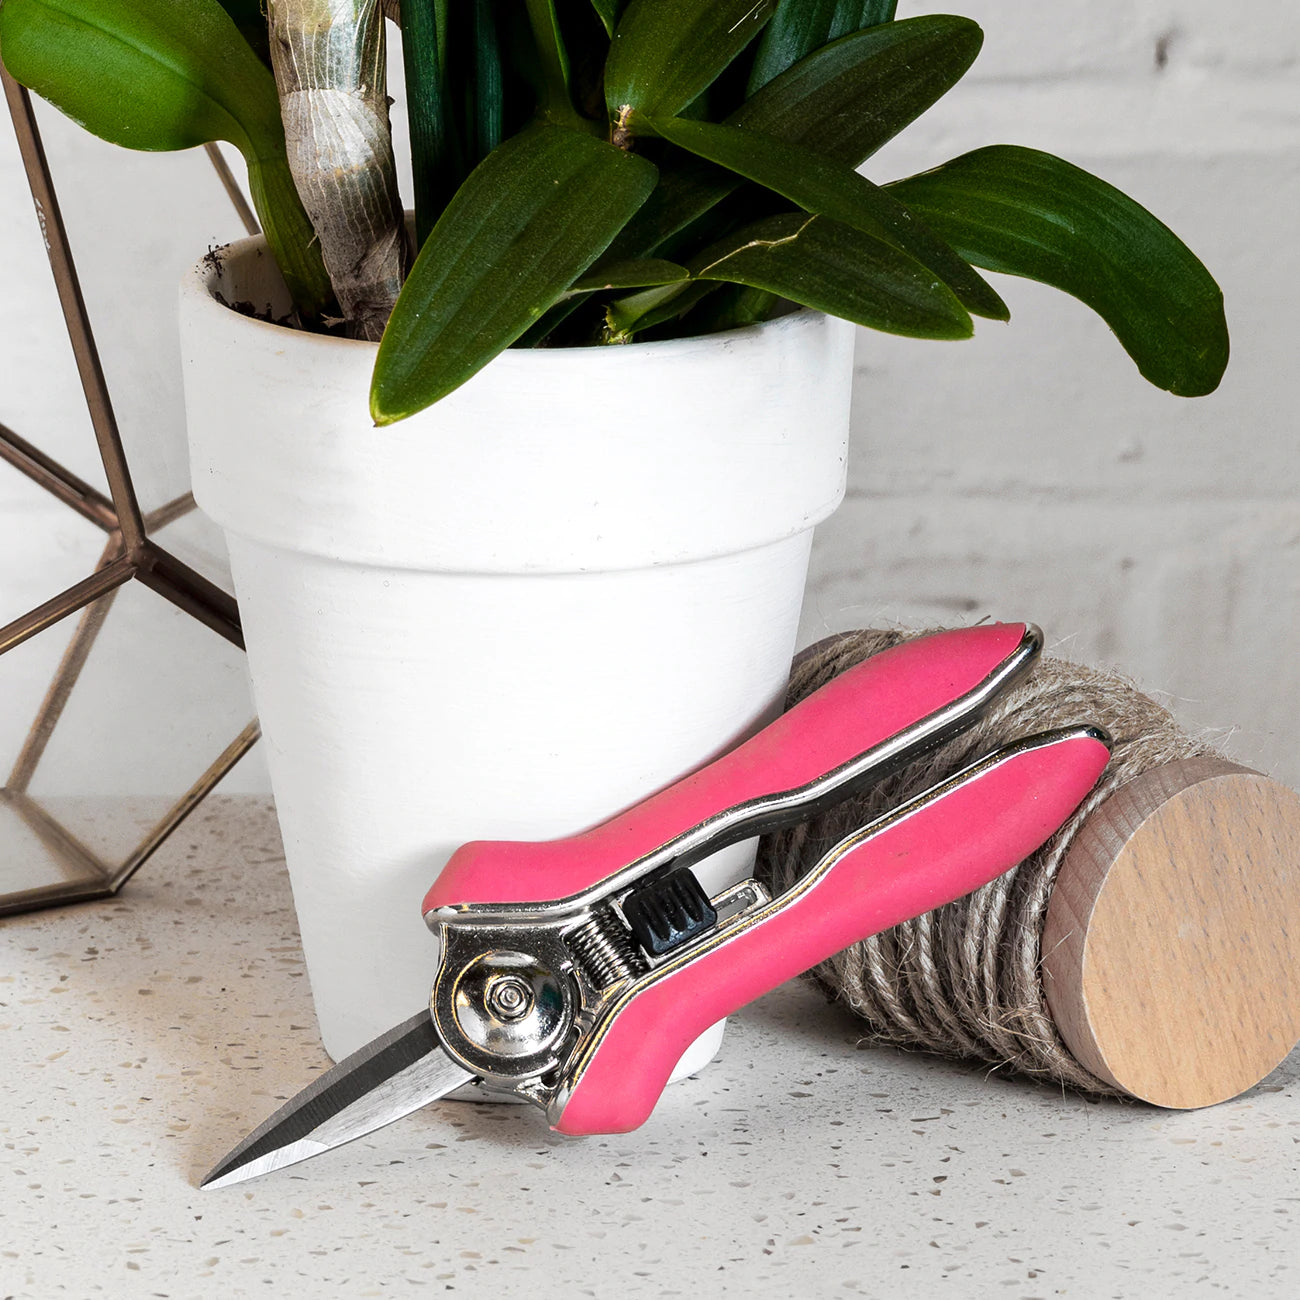 If you’re just a little bit in love with your orchids, these snips are perfect for you, but of course they are also ideal for pruning other flowering houseplants and for floristry.